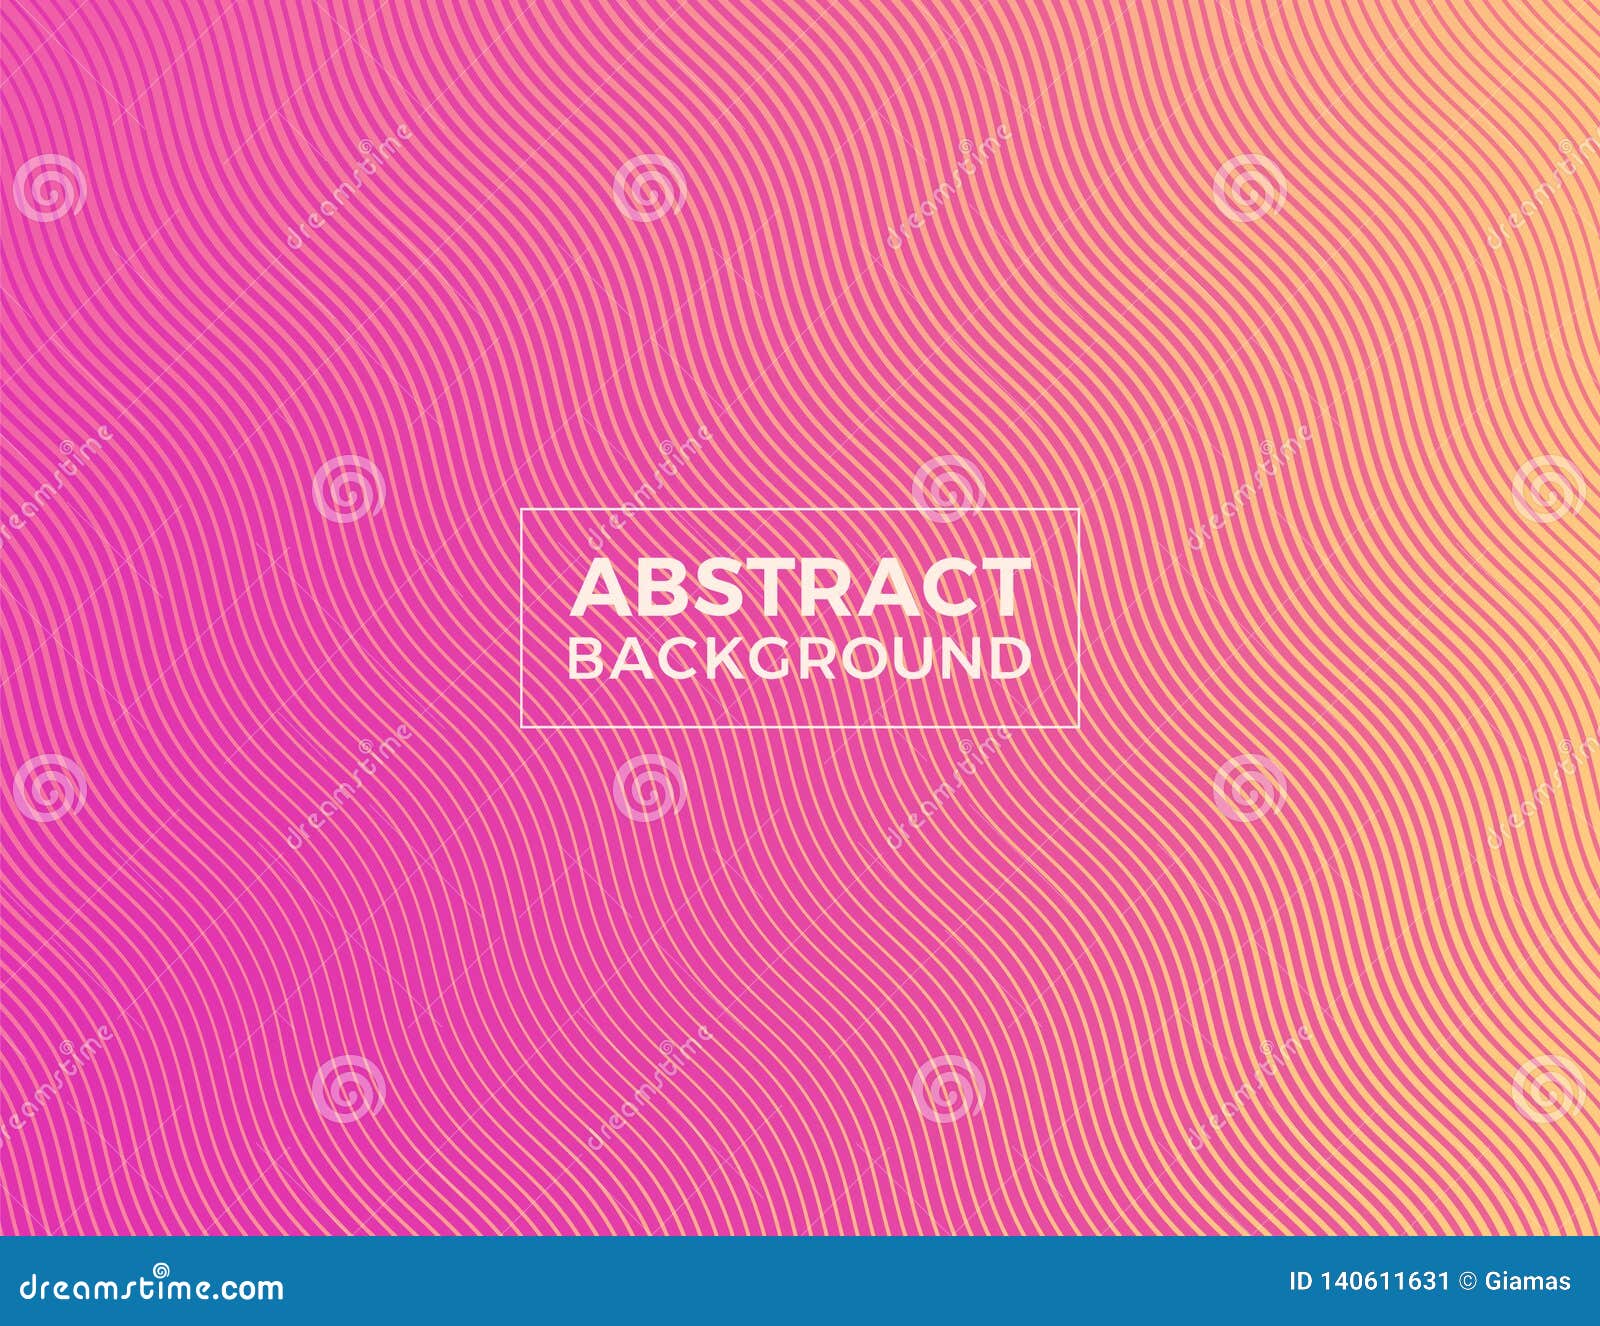 minimal modern abstract geometric wave lines background - 